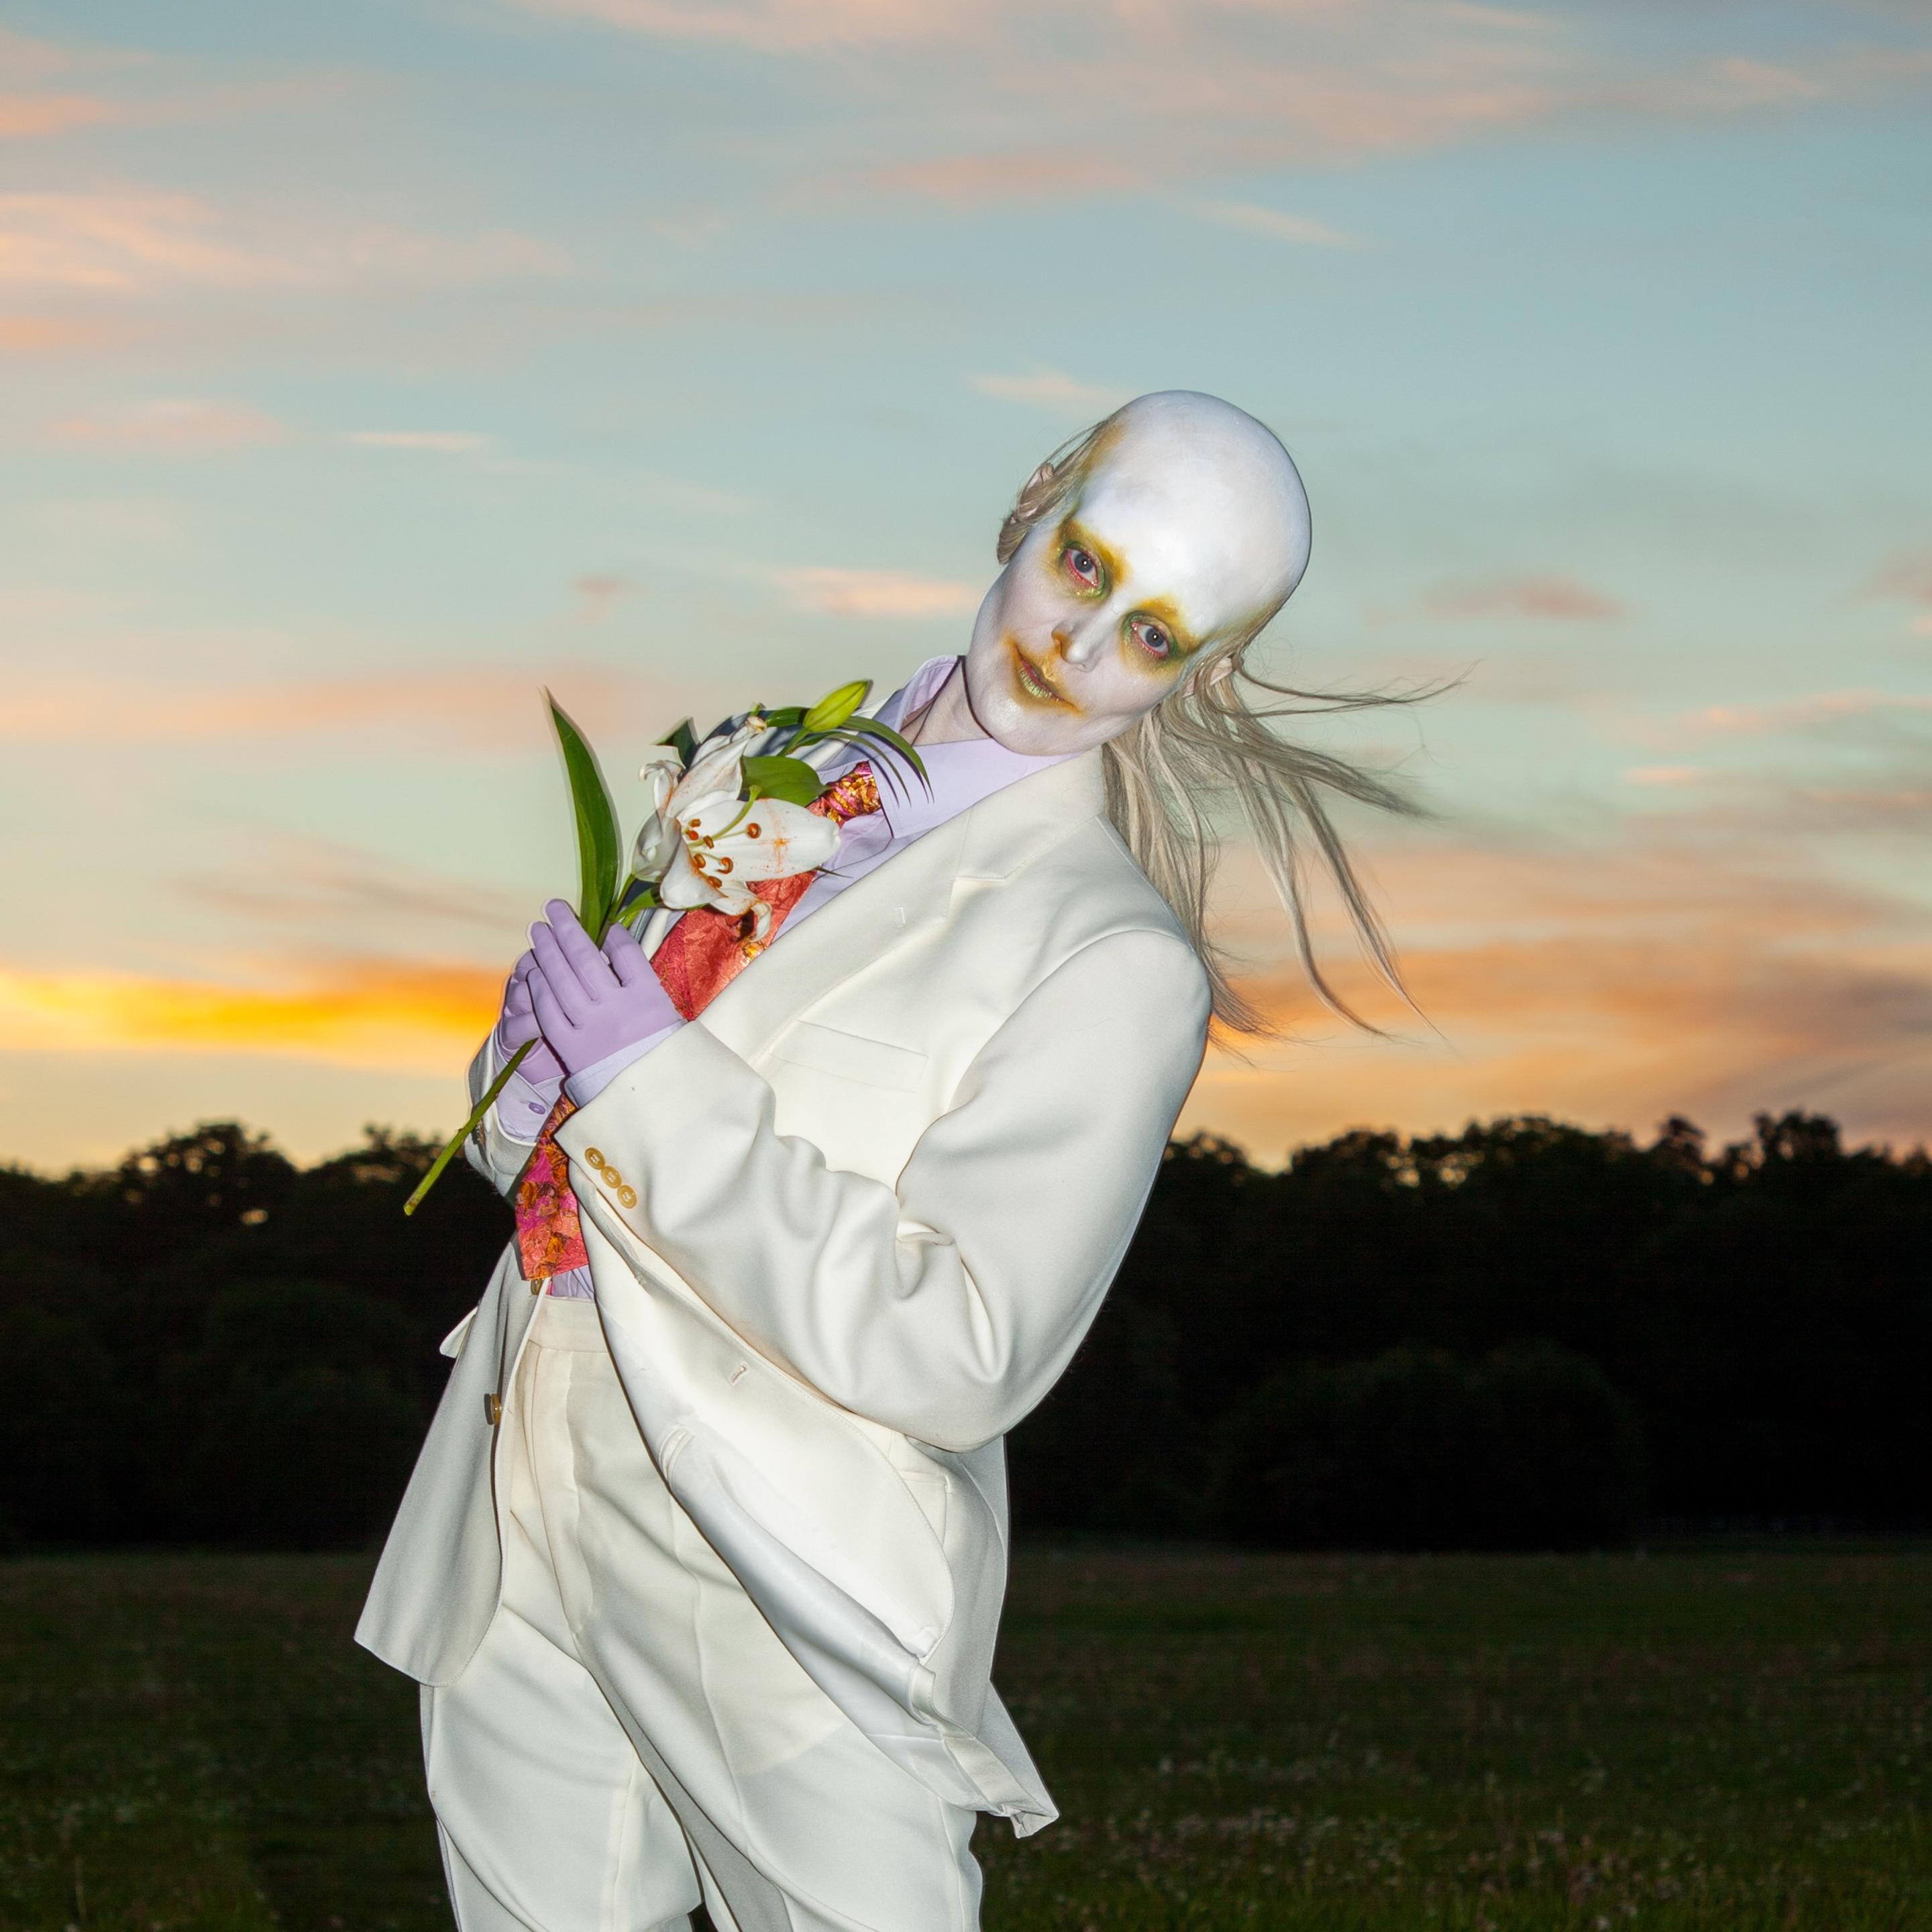 Karin Dreijer aka Fever Ray wears a bald cap and all white makeup, and a traditional masc white suit, holding a flower posey 